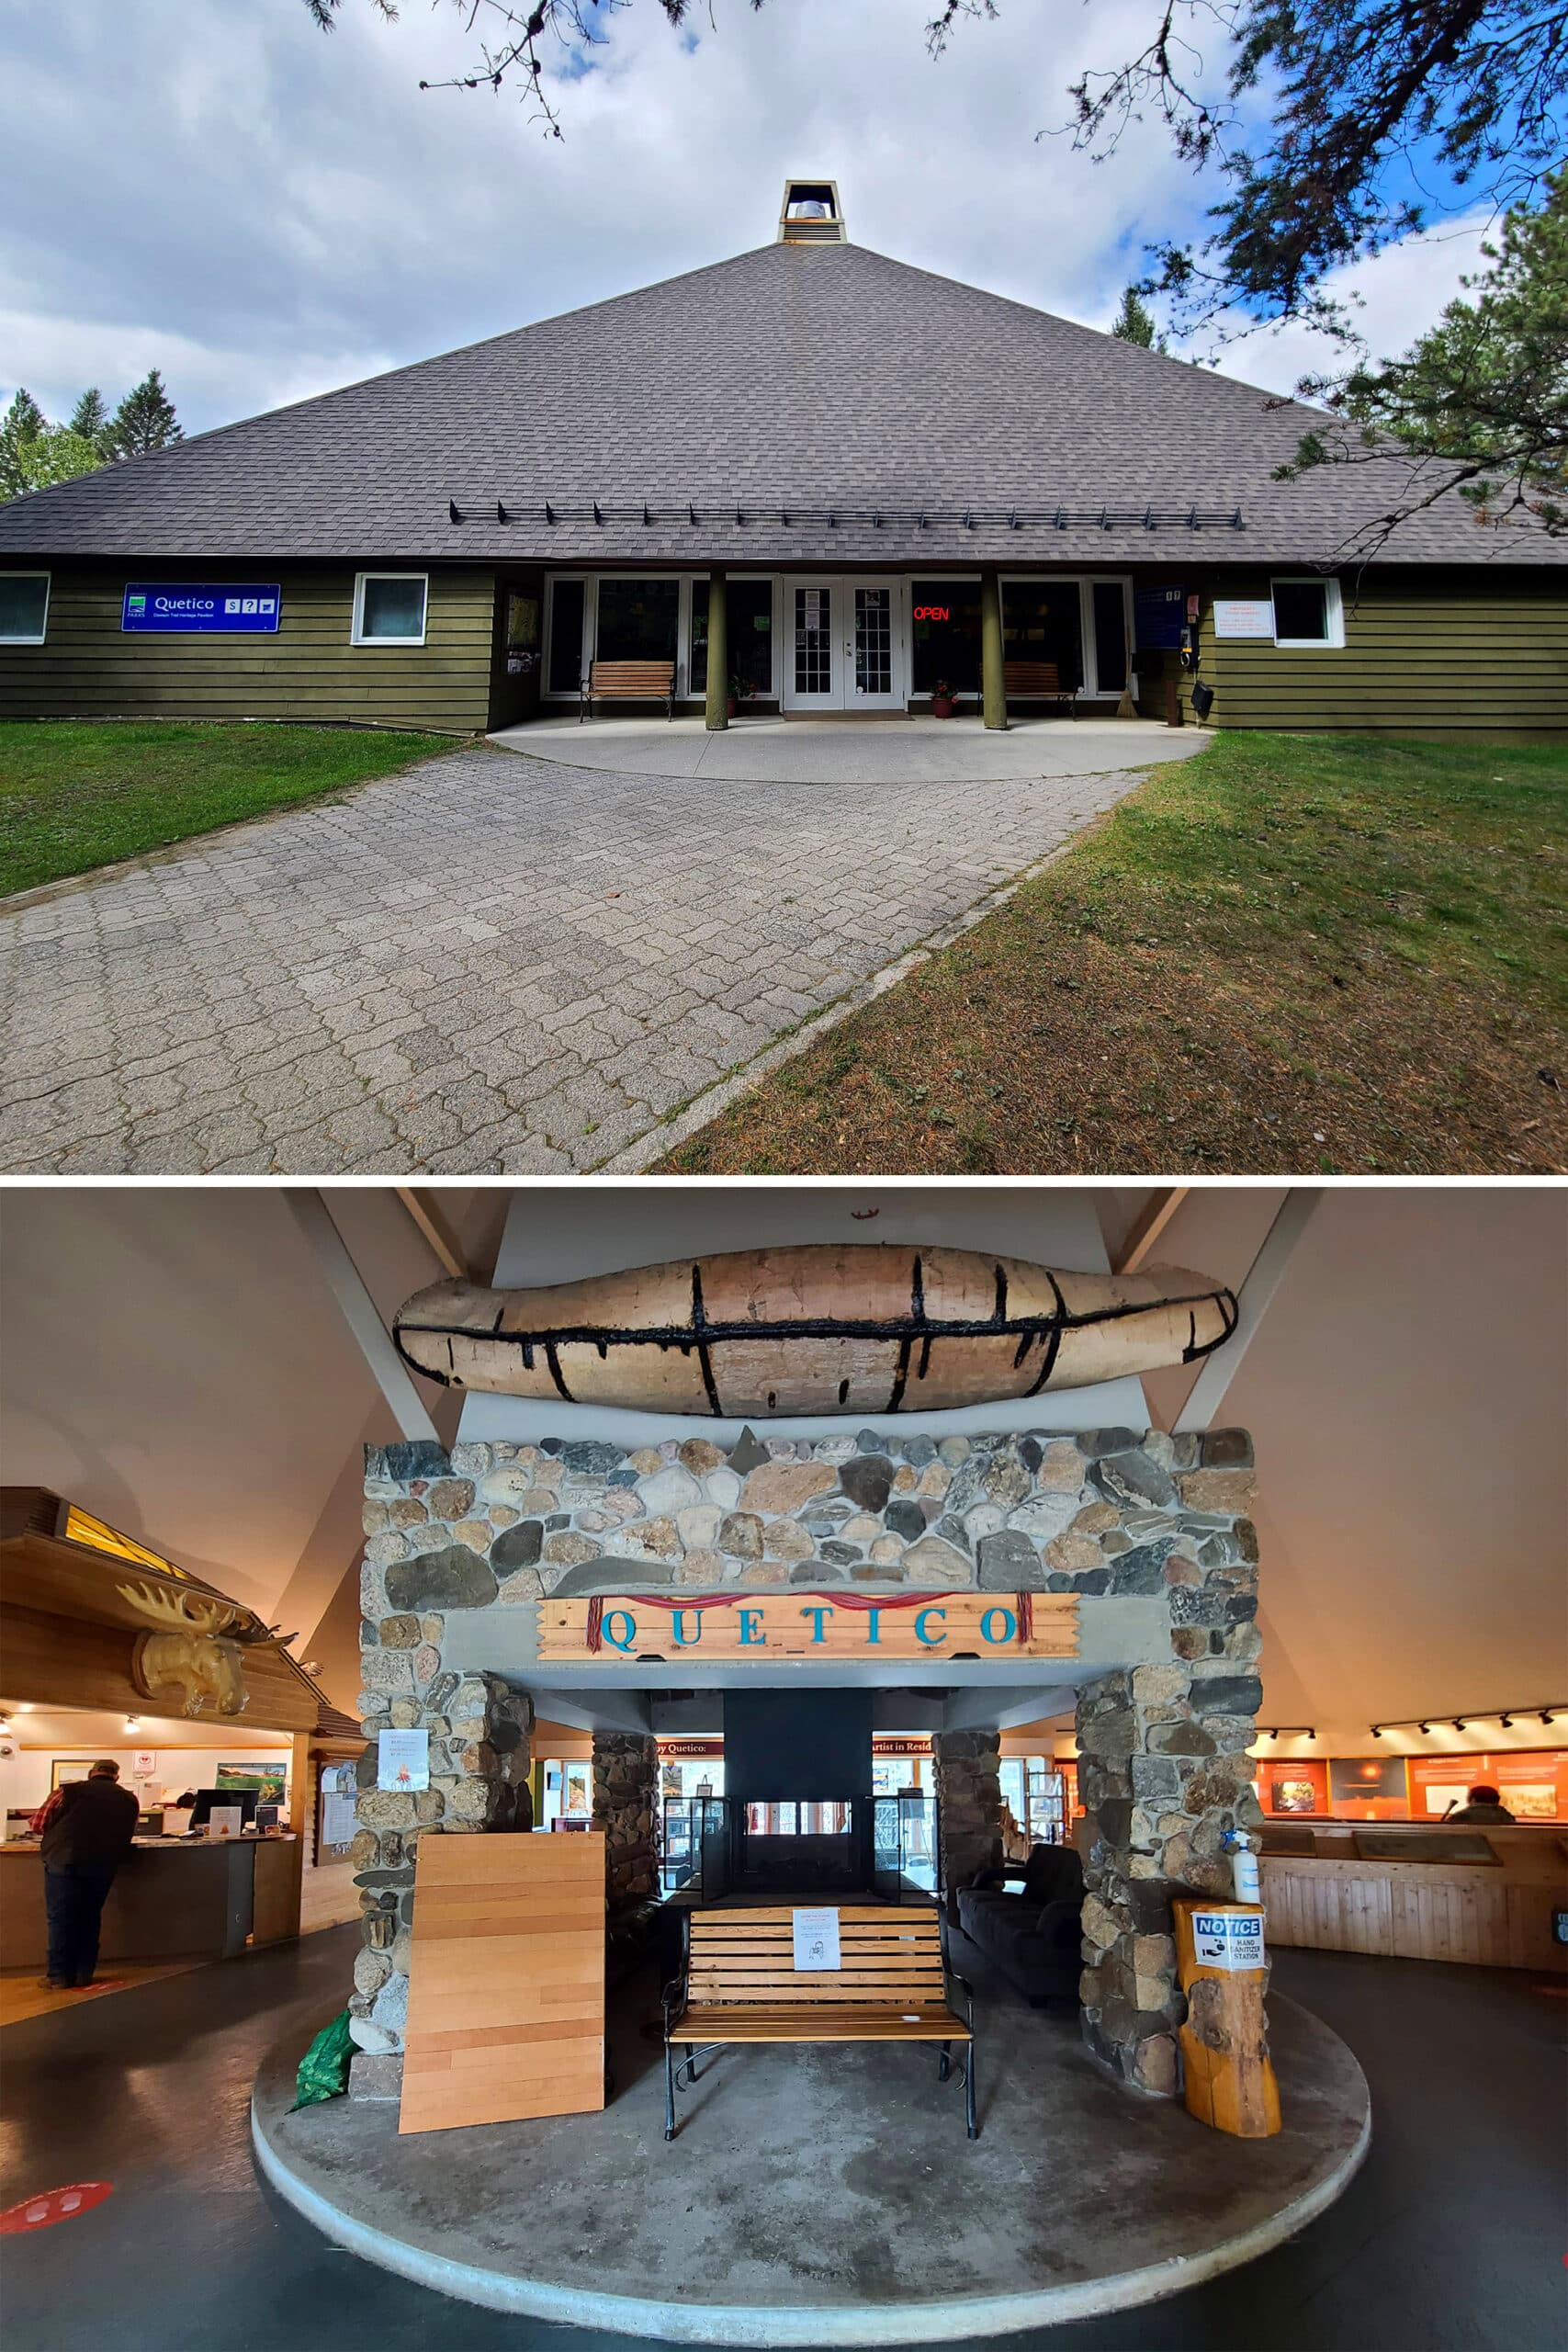 A 2 part image showing the interior and exterior of the Quetico Provincial park visitor center.